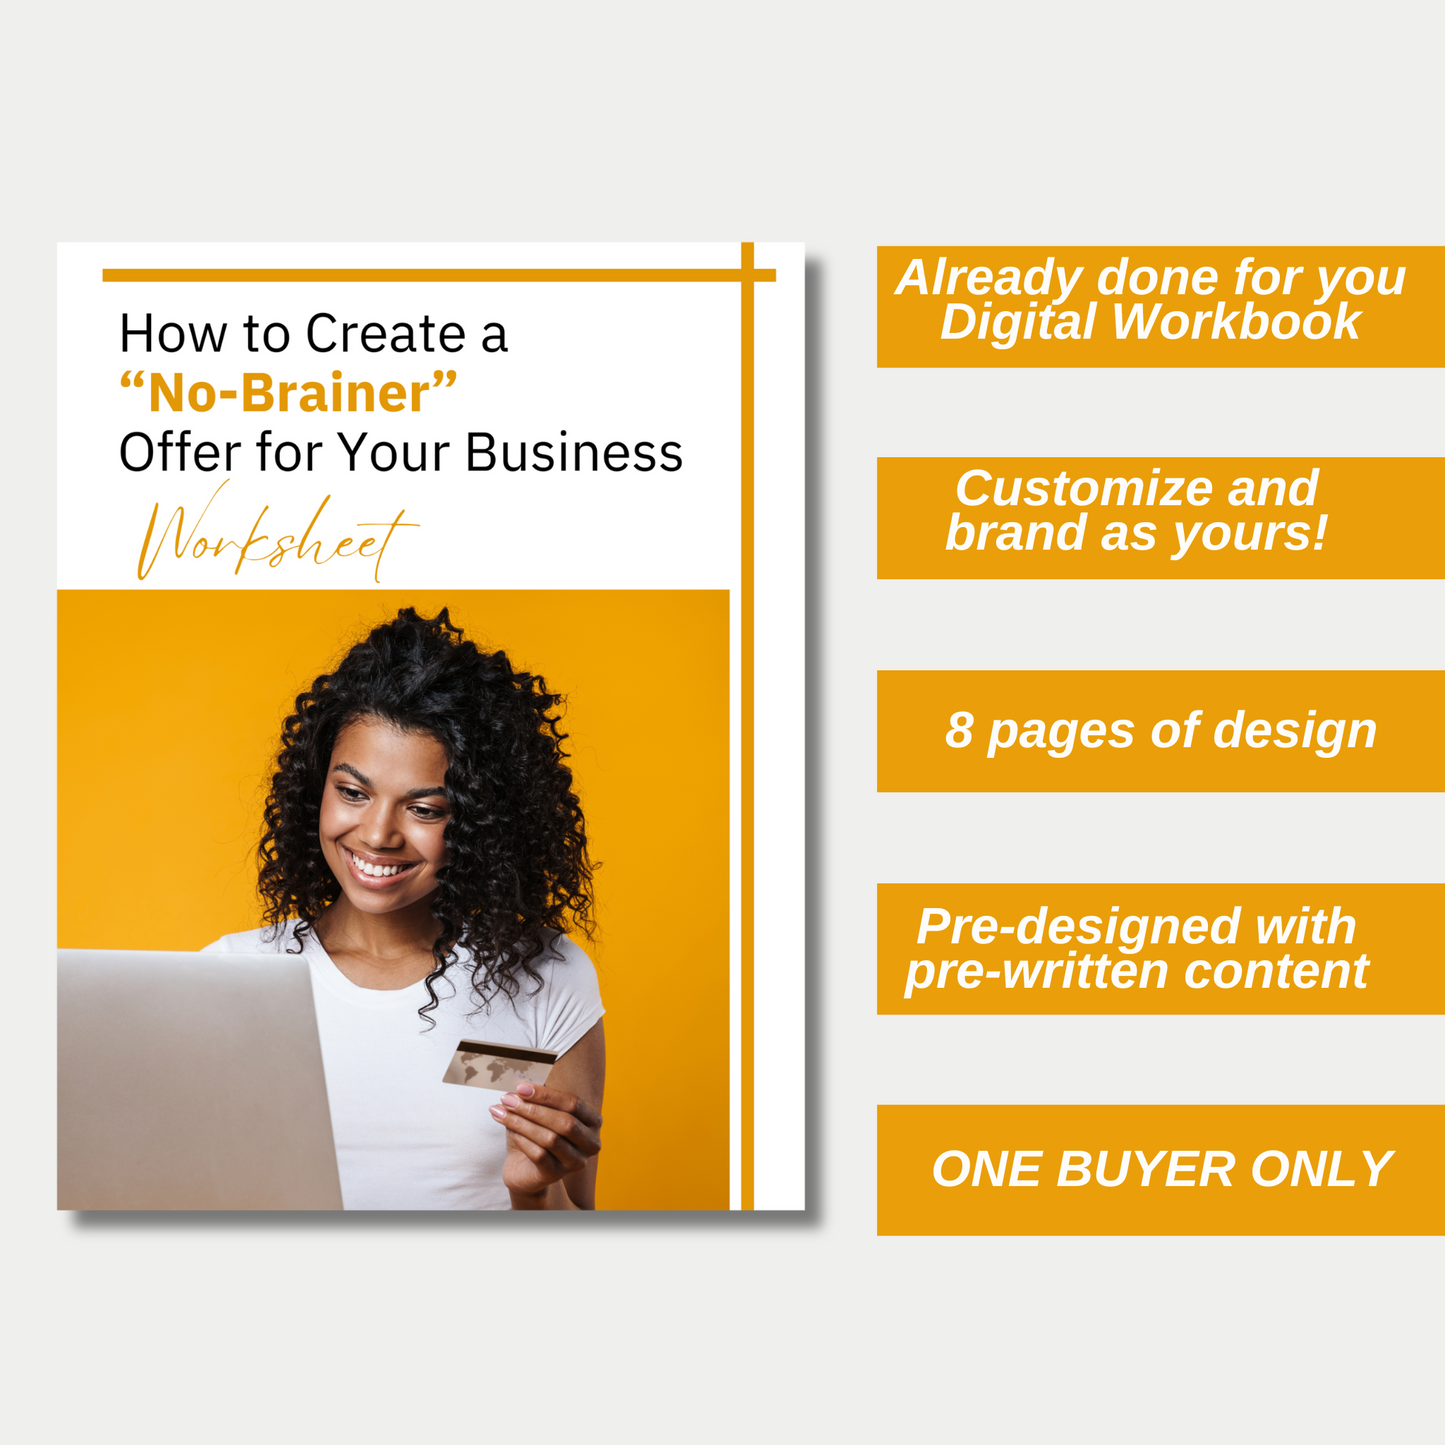 How to Create a “No-Brainer” Offer for Your Business - Worksheet